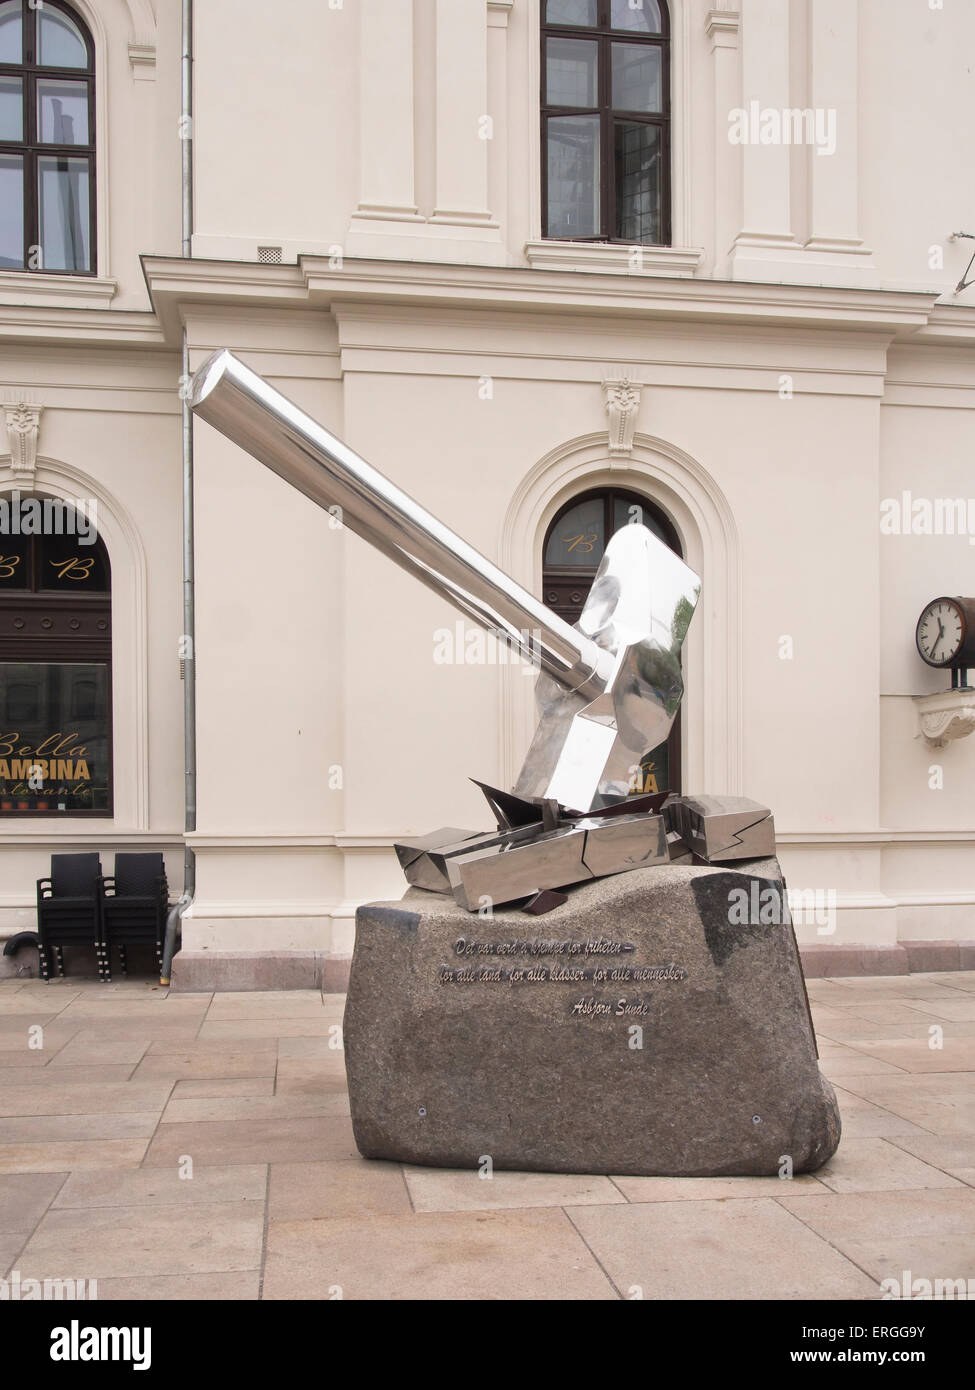 Osvald-monumentet,  remembering resistance against the Nazis in WWII in Jernbanetorget, Oslo Norway hammer crushing swastika Stock Photo